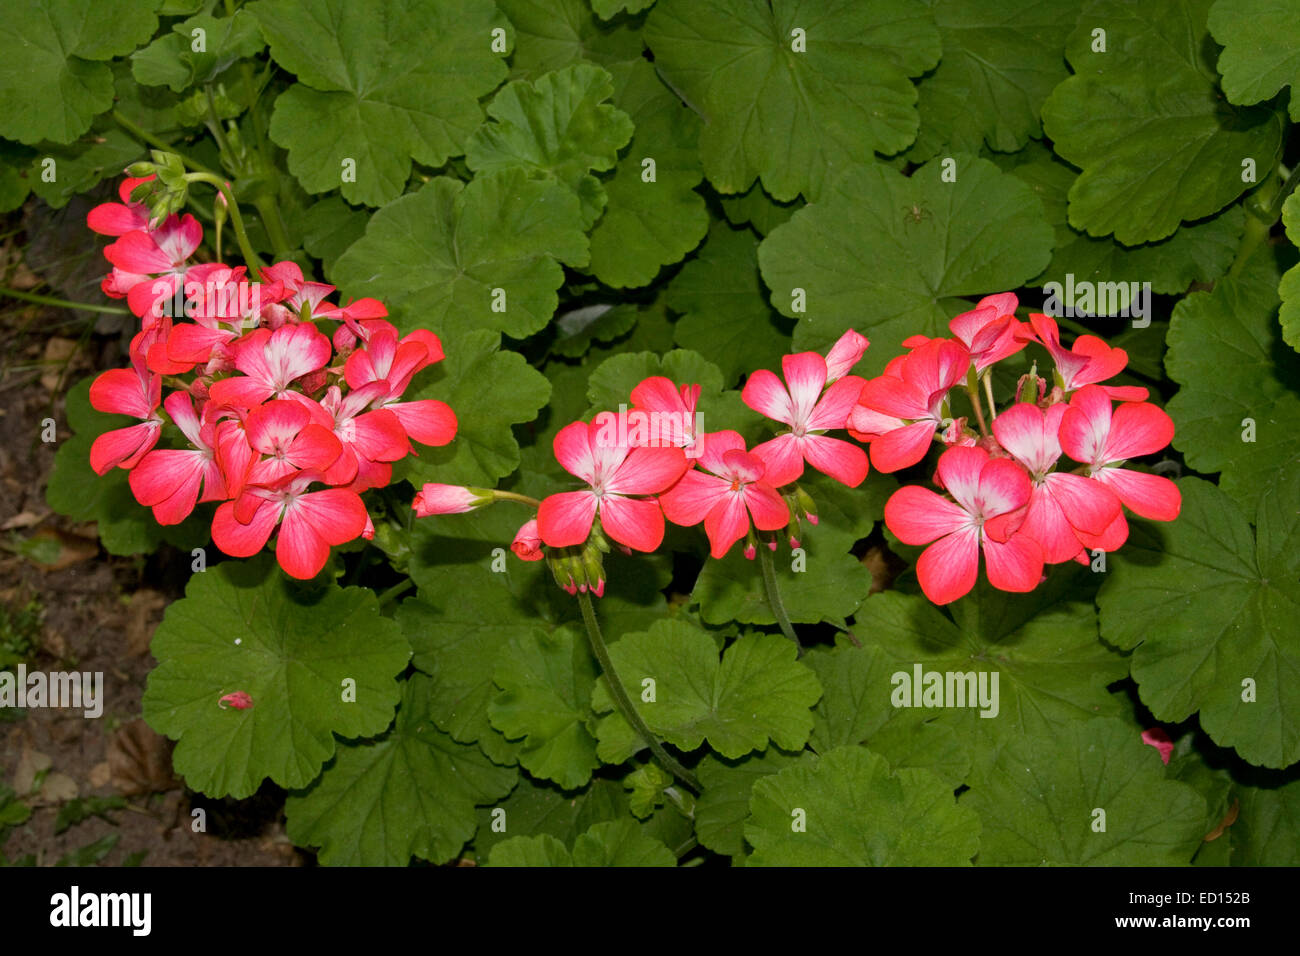 Cluster of red geranium flowers with white throats among emerald green foliage Stock Photo